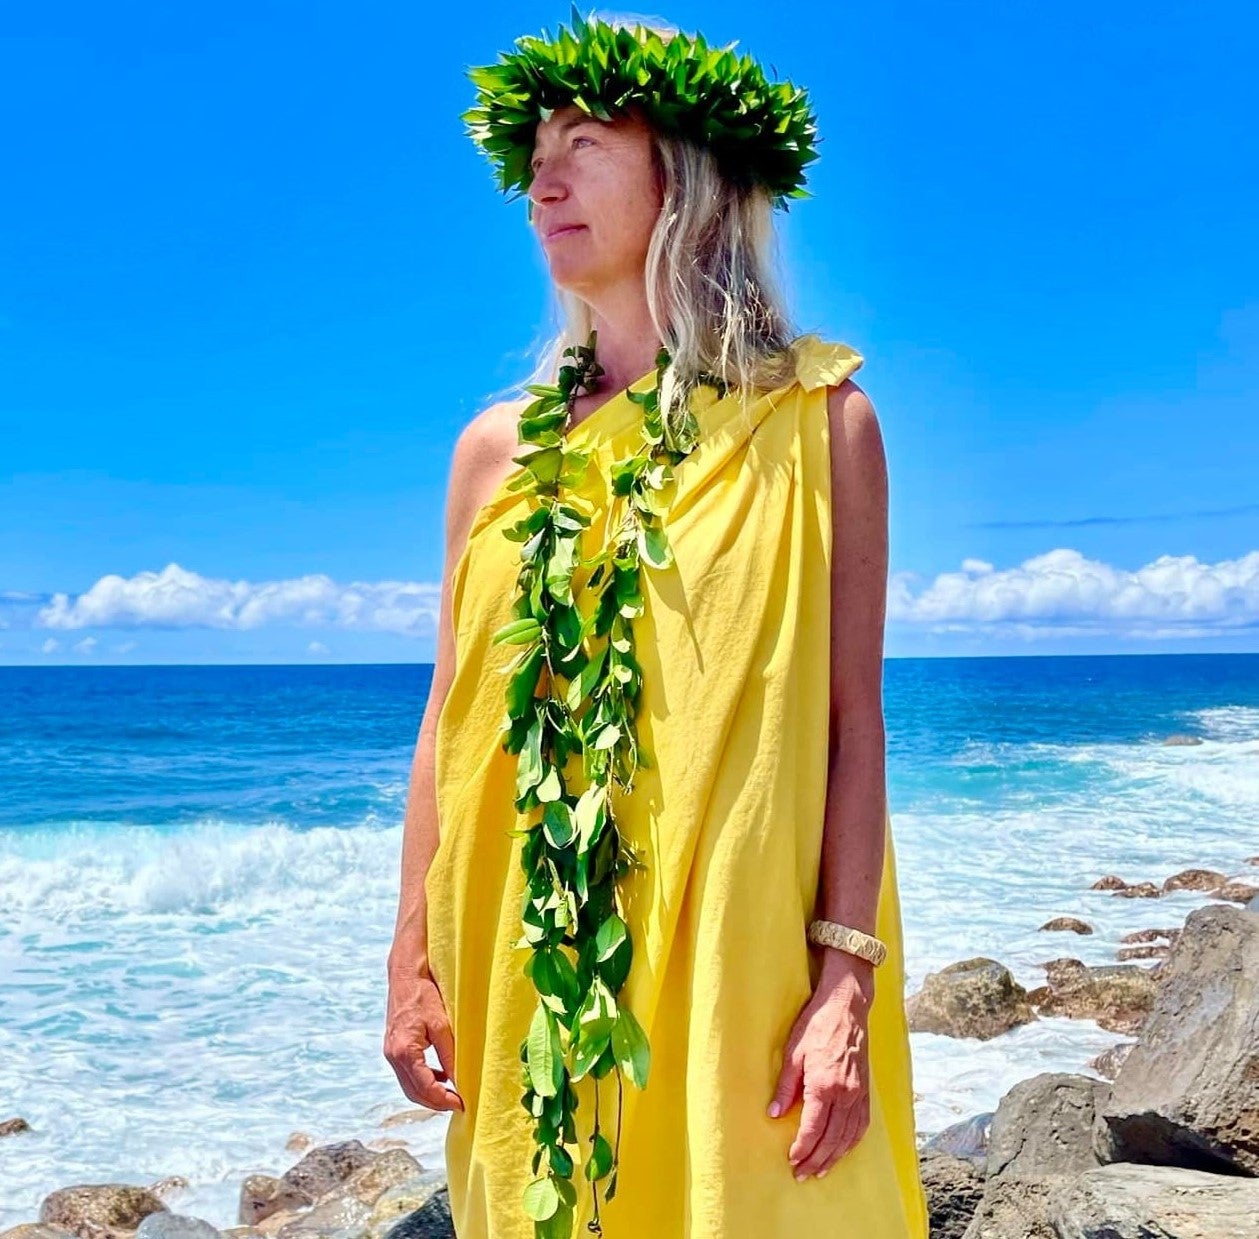 woman in a yellow shirt with a lei and headband by the ocean